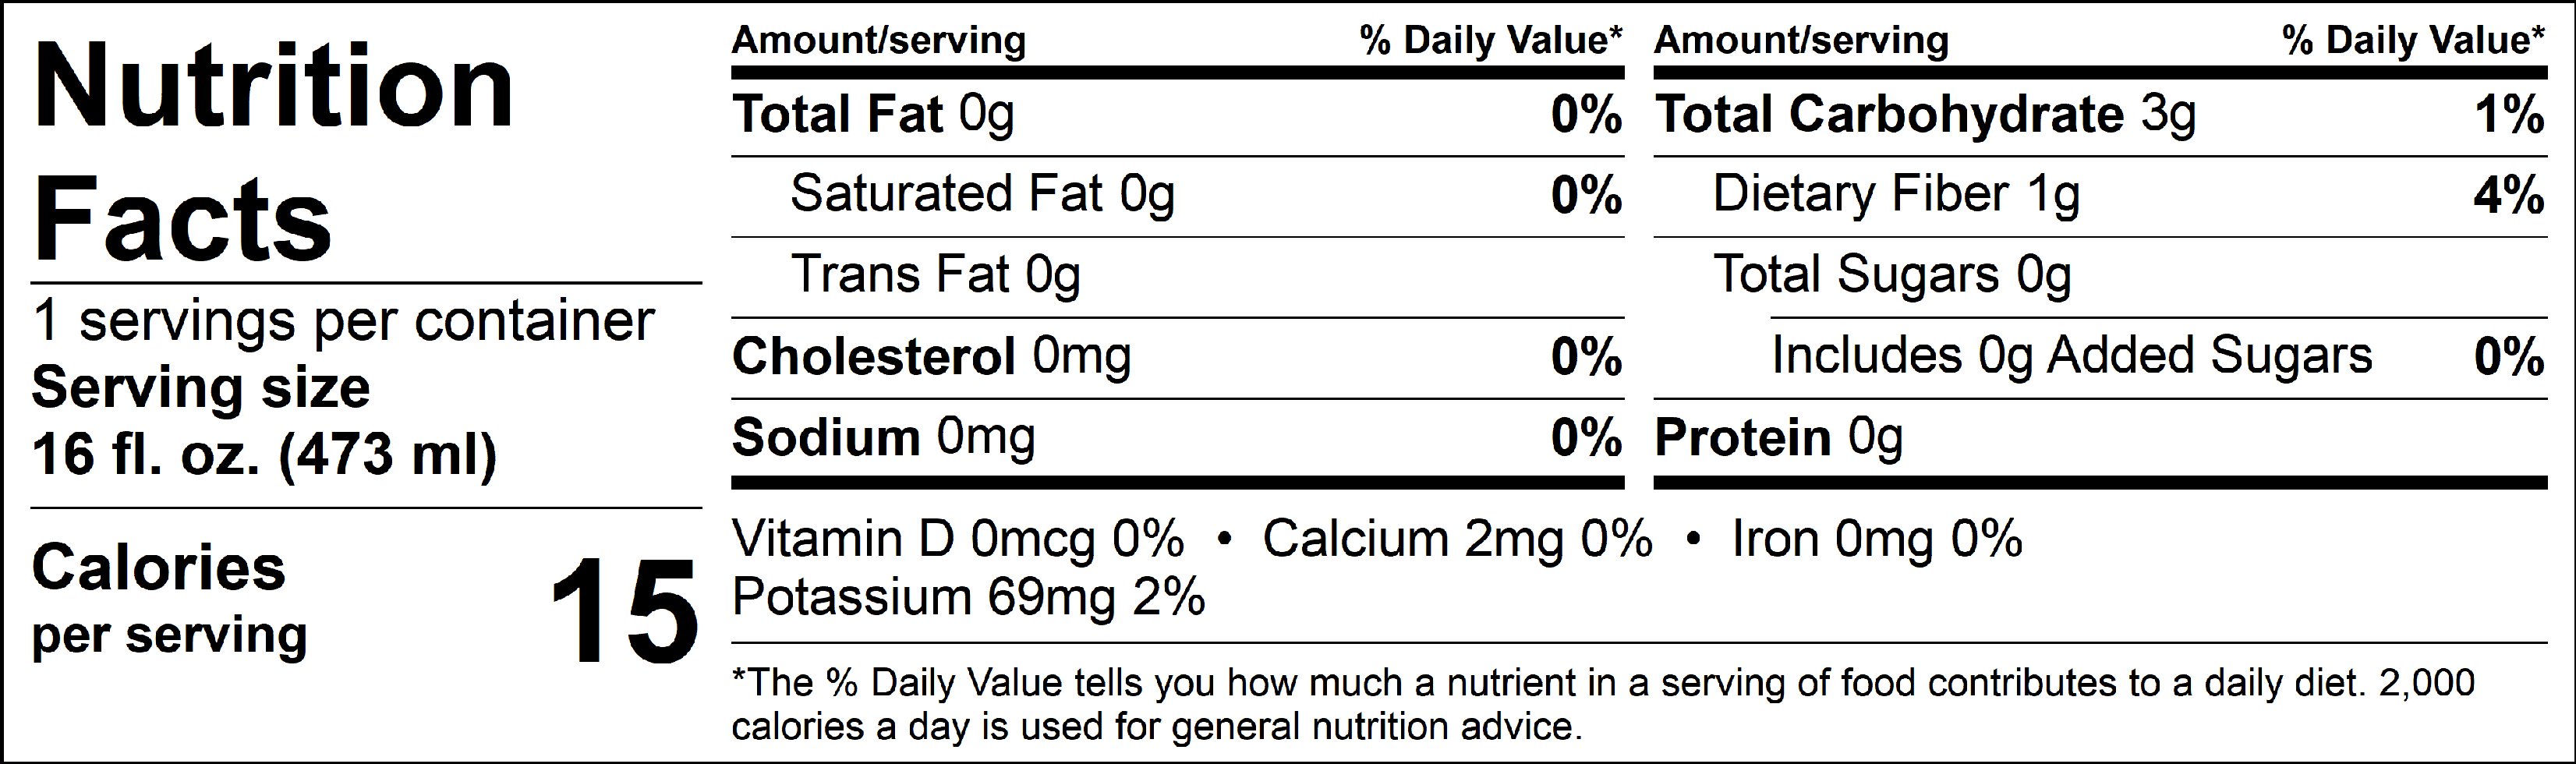 Sugar service code. Amount Nutrition facts. Nutritional value of food. Nutritional value facts. Nutrition facts Table.